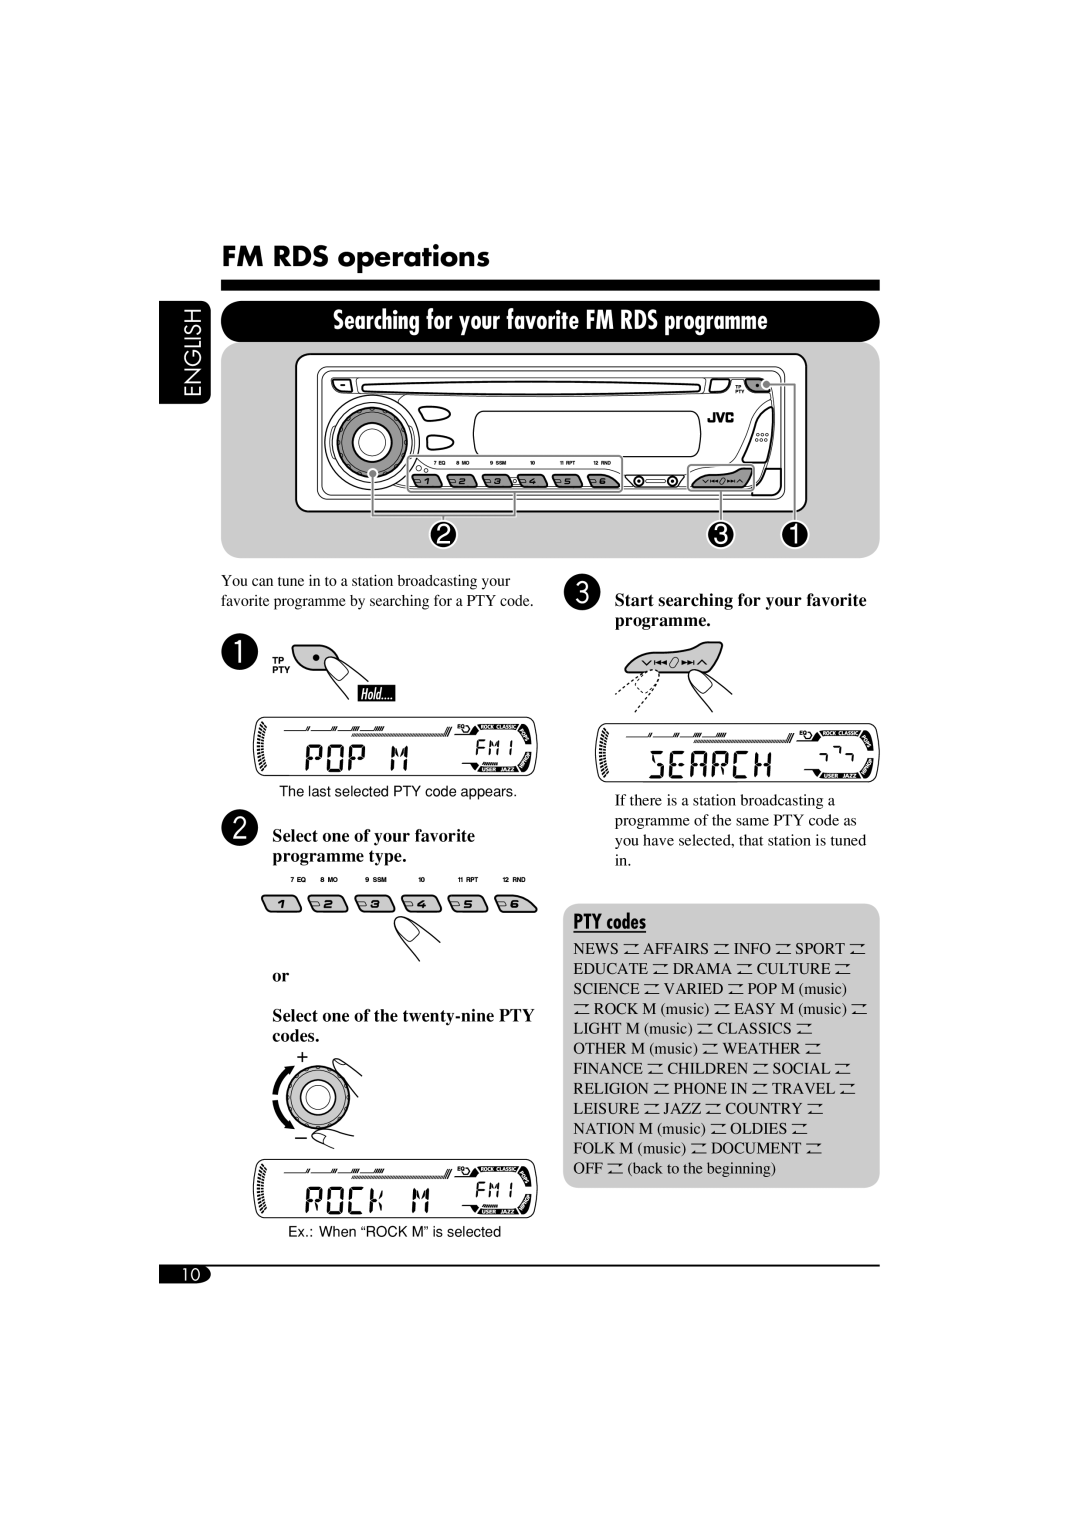 JVC KD-G411 manual FM RDS operations, Searching for your favorite FM RDS programme, PTY codes, English 